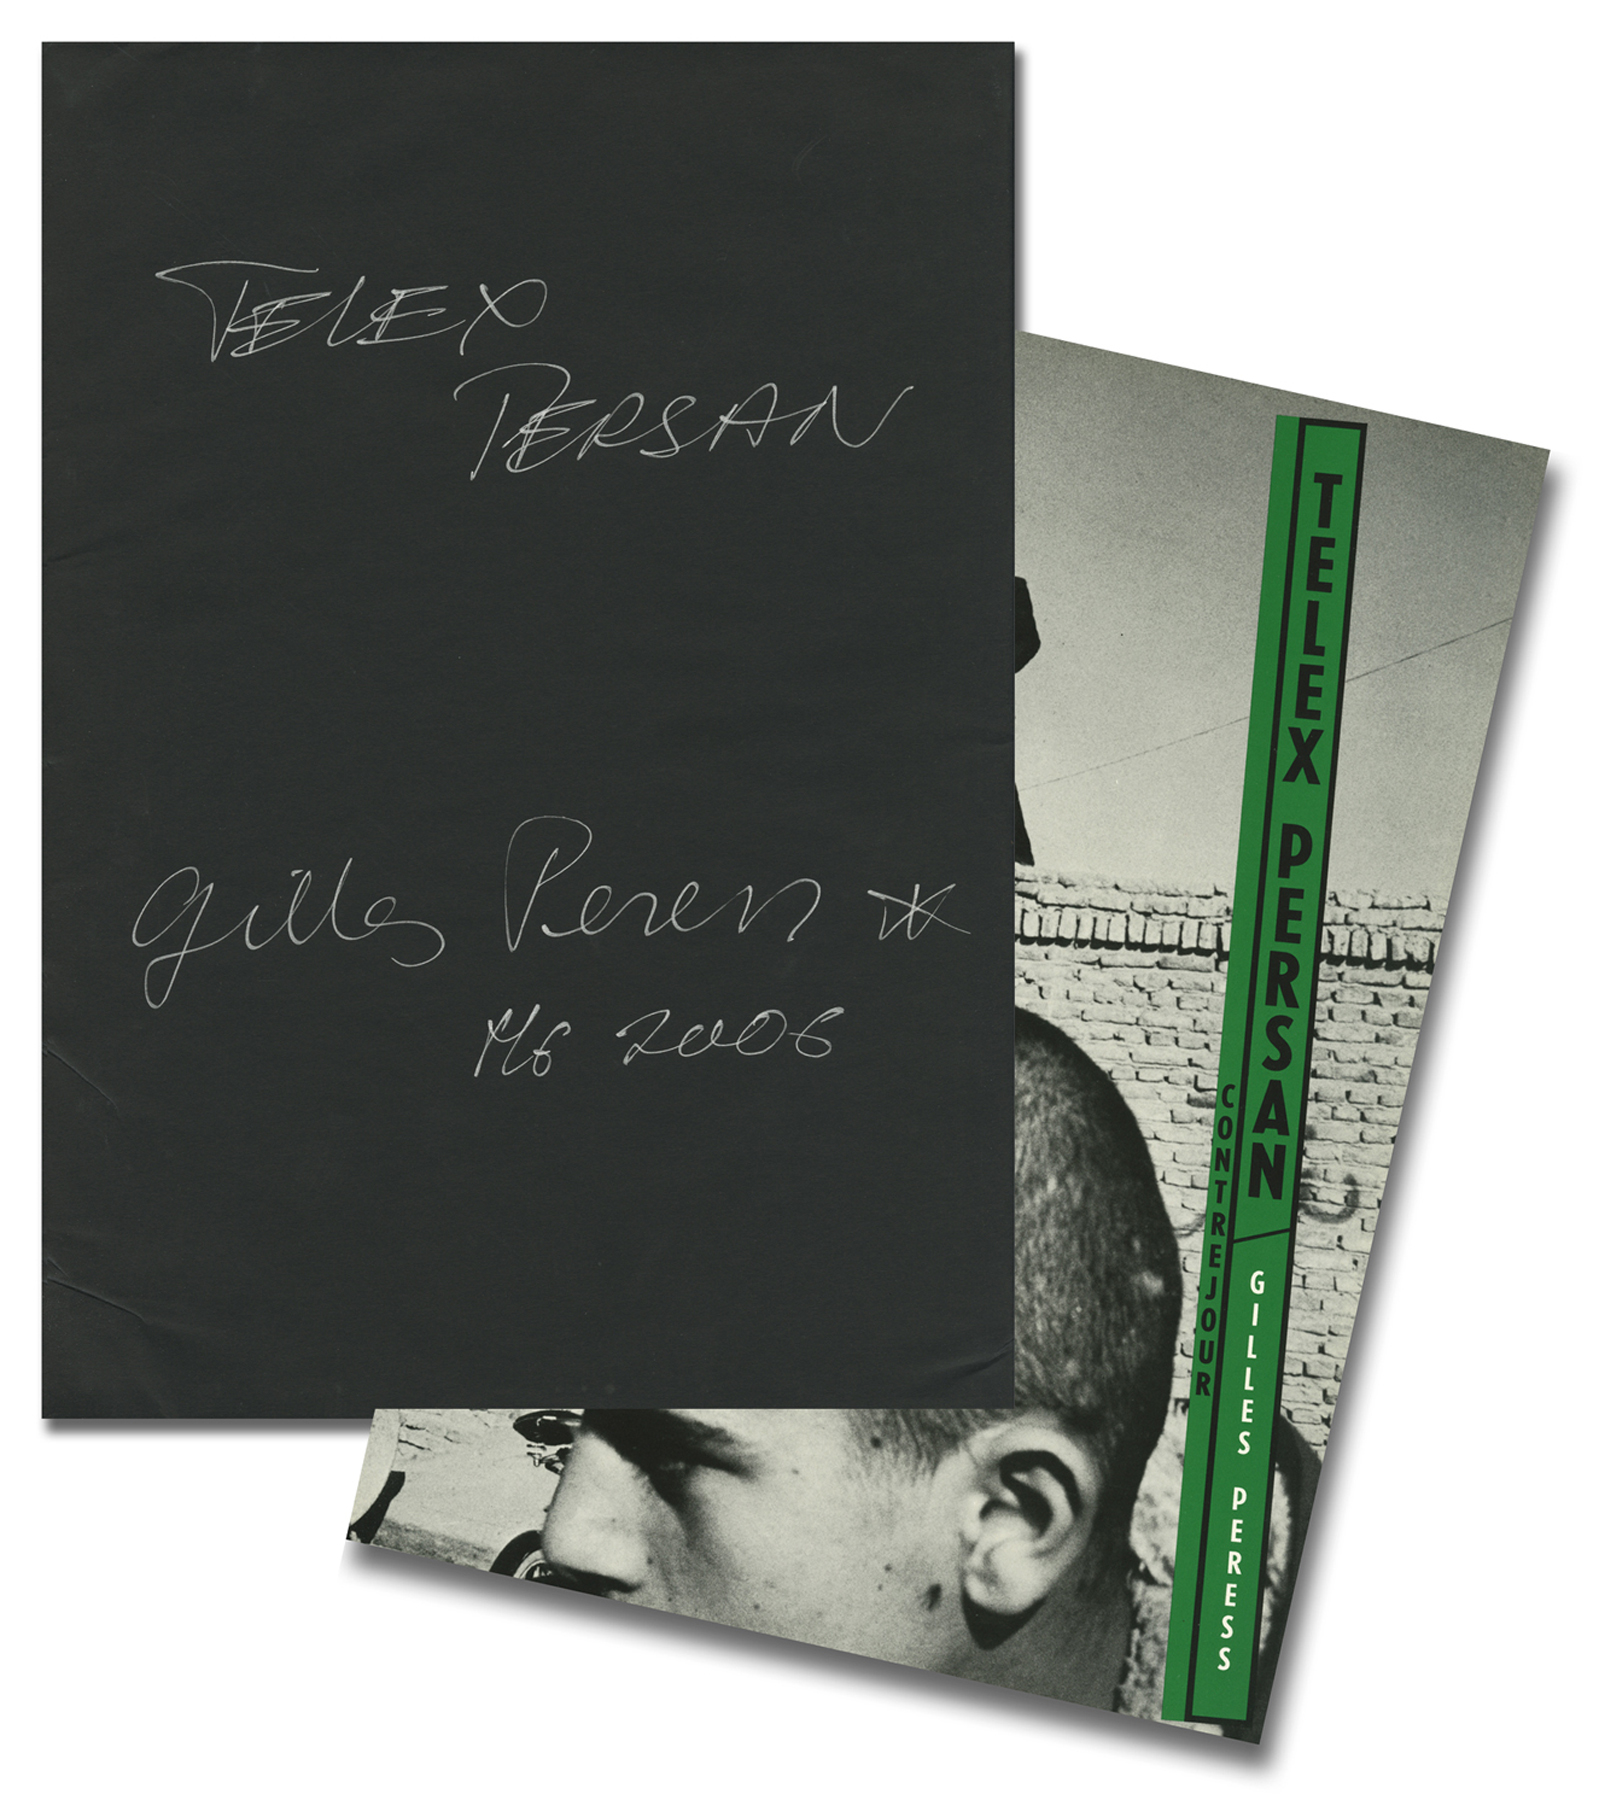 Gilles Peress - Telex Persan - Contrejour - 1984 - Howard Greenberg Gallery